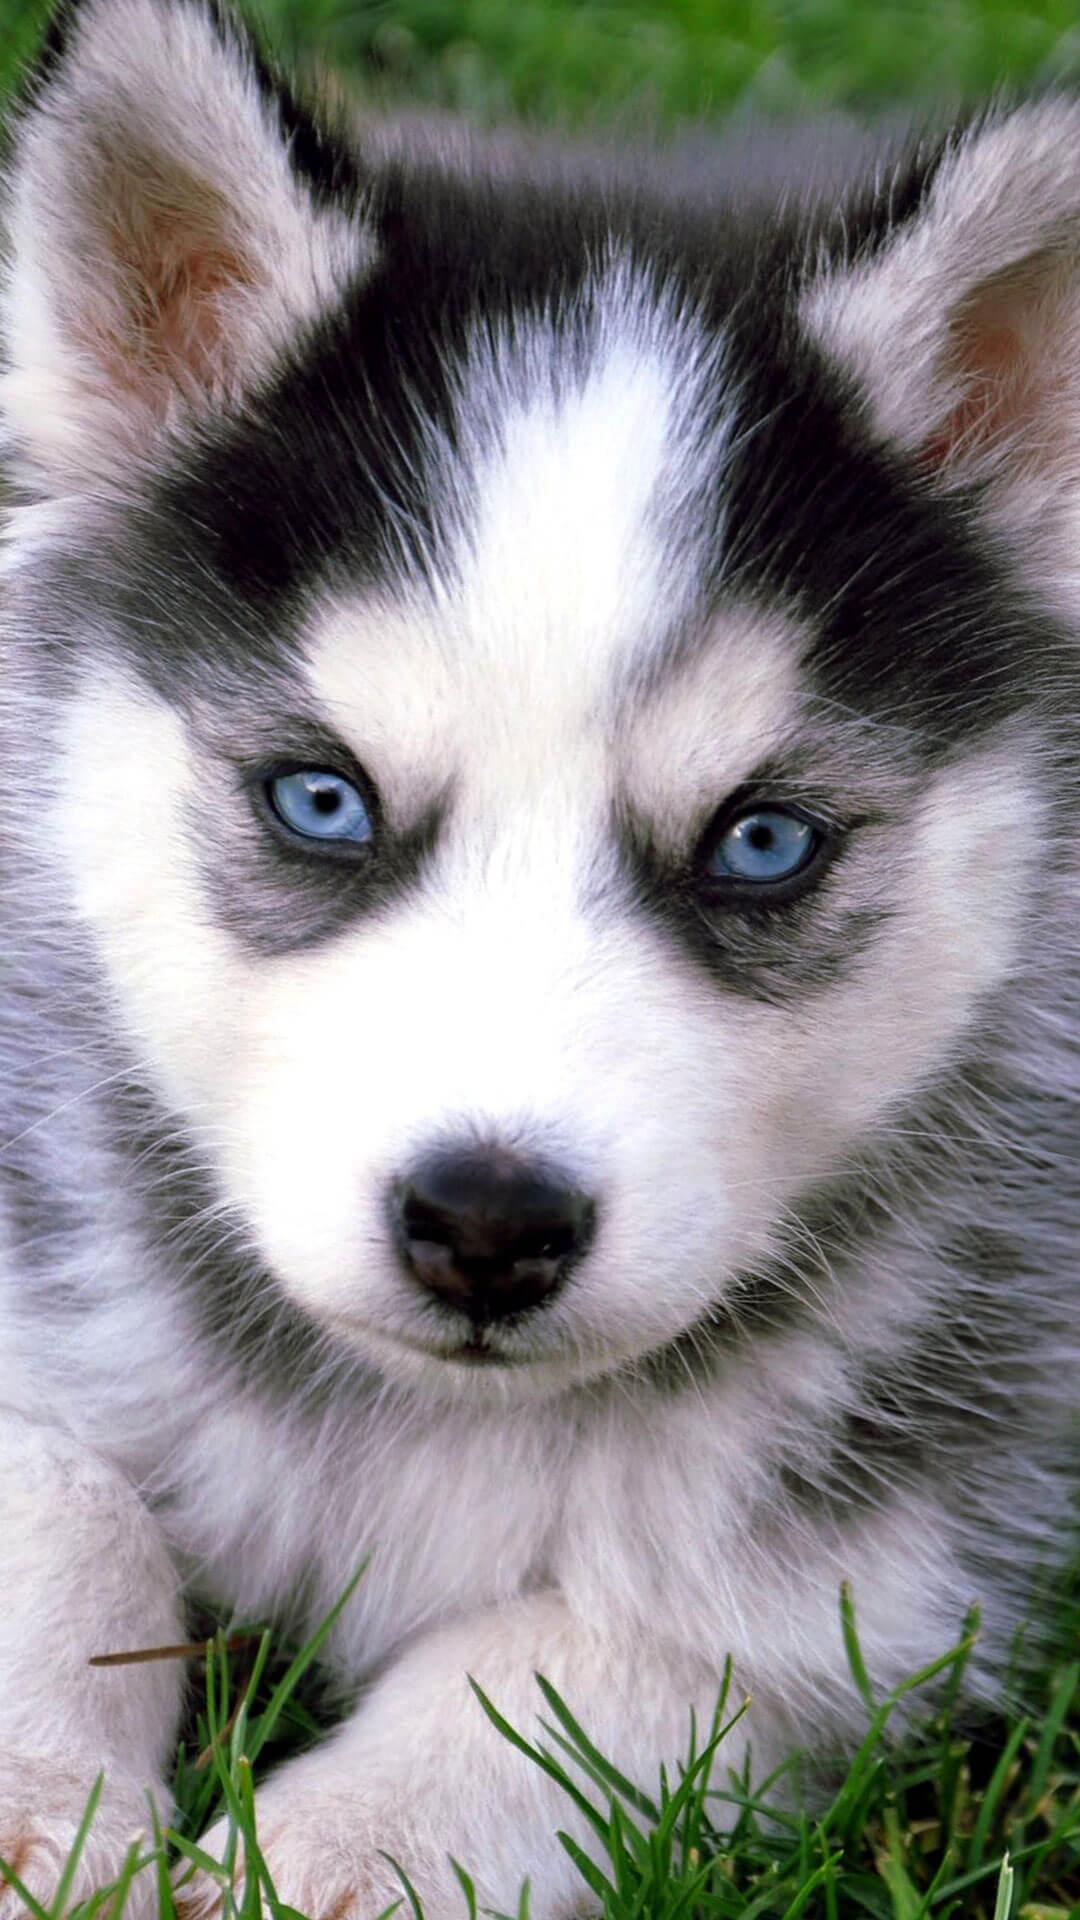 Cute Husky Puppies With Blue Eyes iPhone Wallpaper HD. Animal